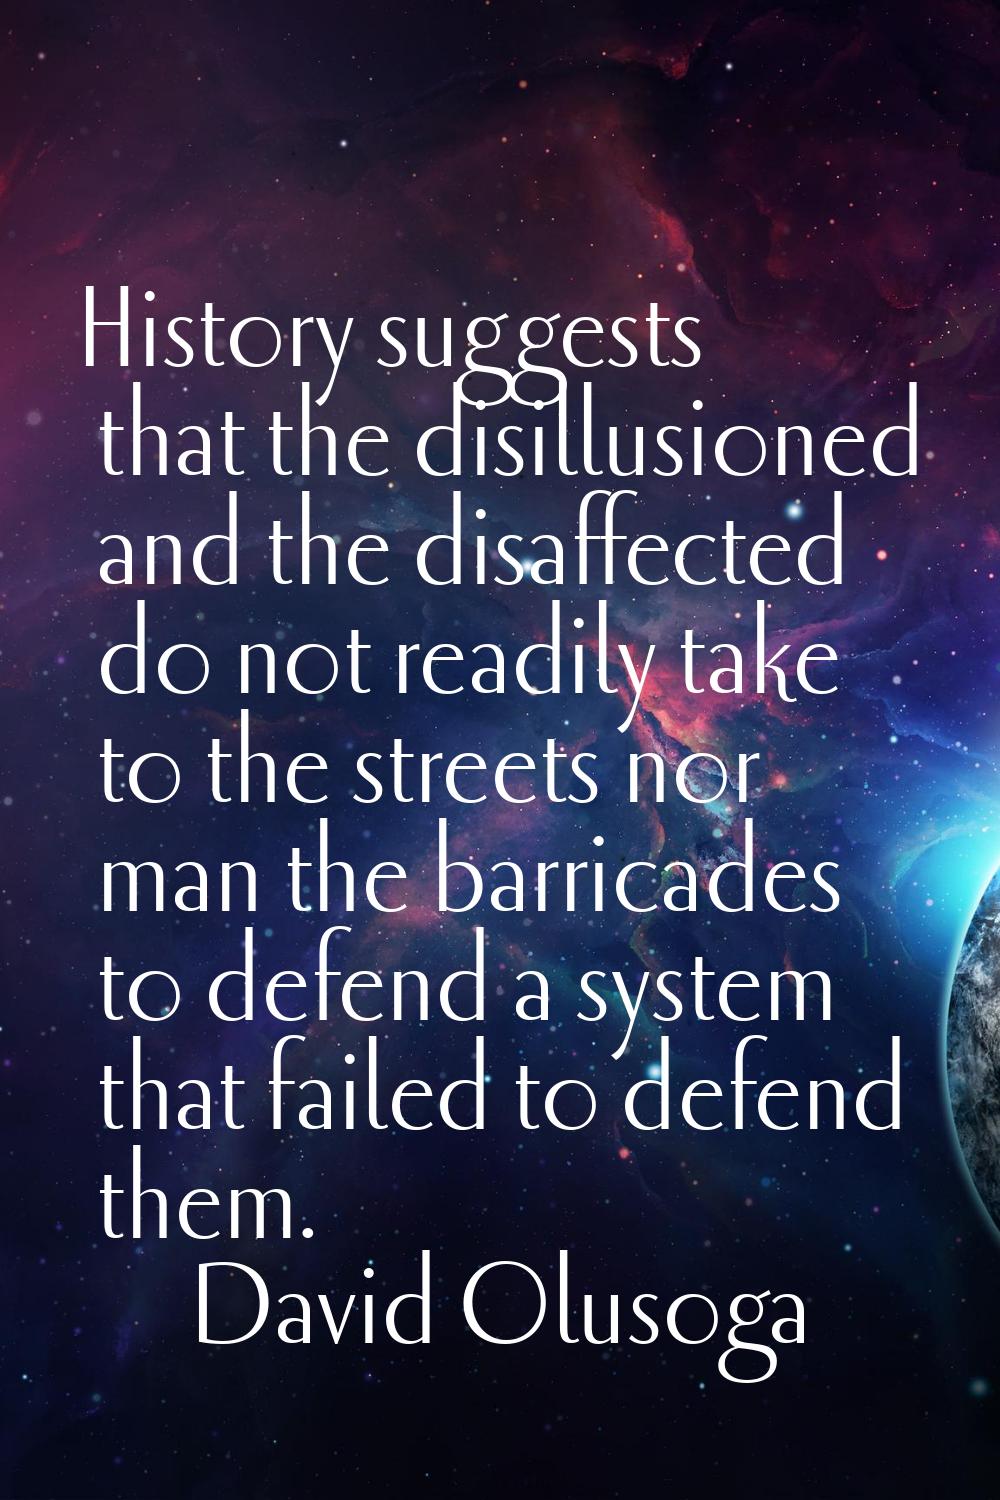 History suggests that the disillusioned and the disaffected do not readily take to the streets nor 